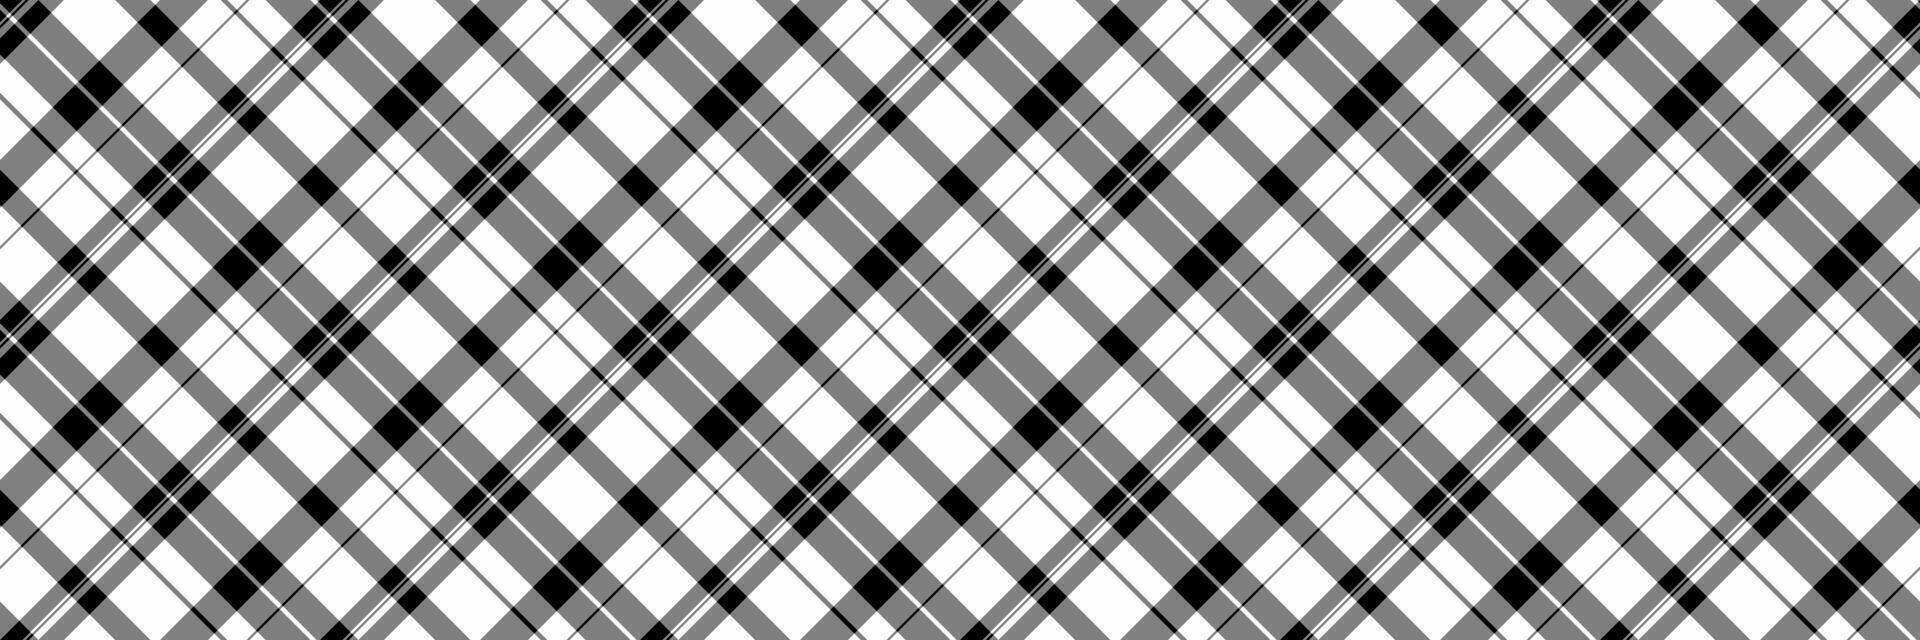 Fit background pattern, mid seamless fabric tartan. Indian textile texture check plaid in gray and white colors. vector